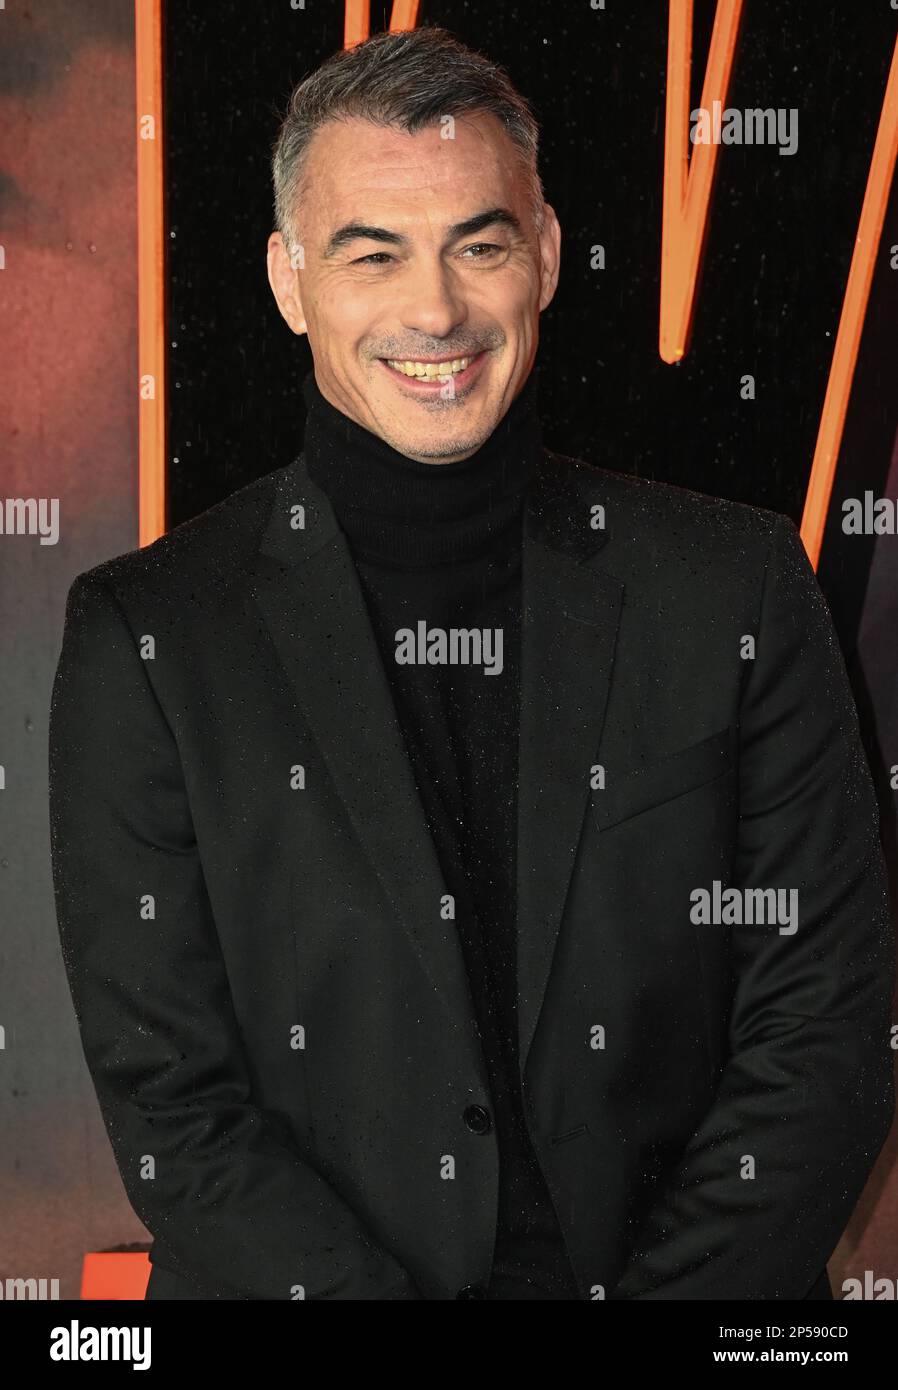 London, UK. 06/03/2023, Chad Stanelski attends the UK gala screening of 'John Wick: Chapter 4 at Cineworld Leicester Square, London, UK. Photo date: 6th March 2023. UK gala screening of 'John Wick: Chapter 4 at Cineworld Leicester Square, London, UK. Photo date: 6th March 2023. attends the UK gala screening of 'John Wick: Chapter 4 at Cineworld Leicester Square, London, UK. Photo date: 6th March 2023. Stock Photo